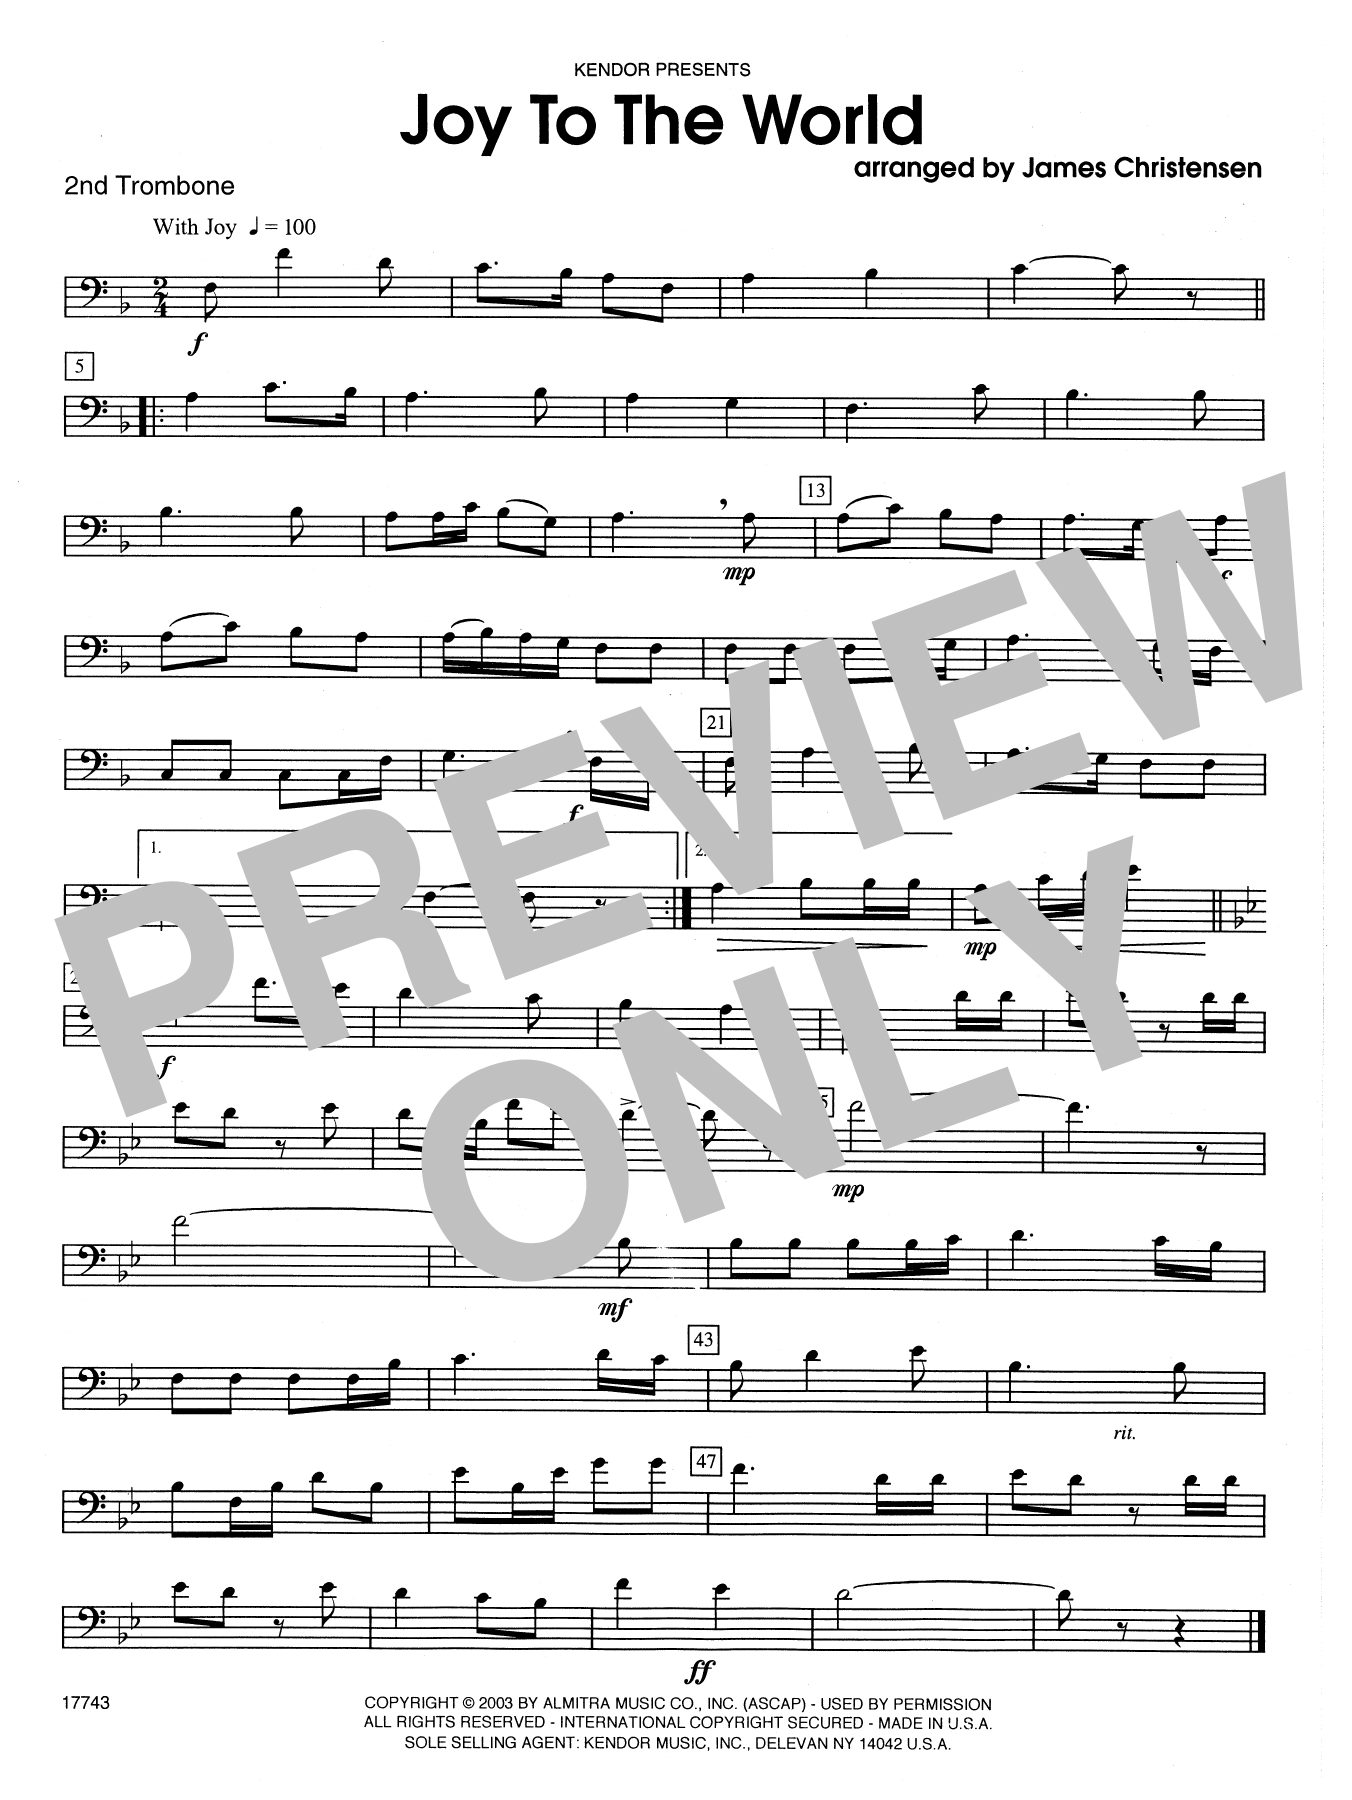 James Christensen Joy to the World - 2nd Trombone sheet music notes and chords. Download Printable PDF.